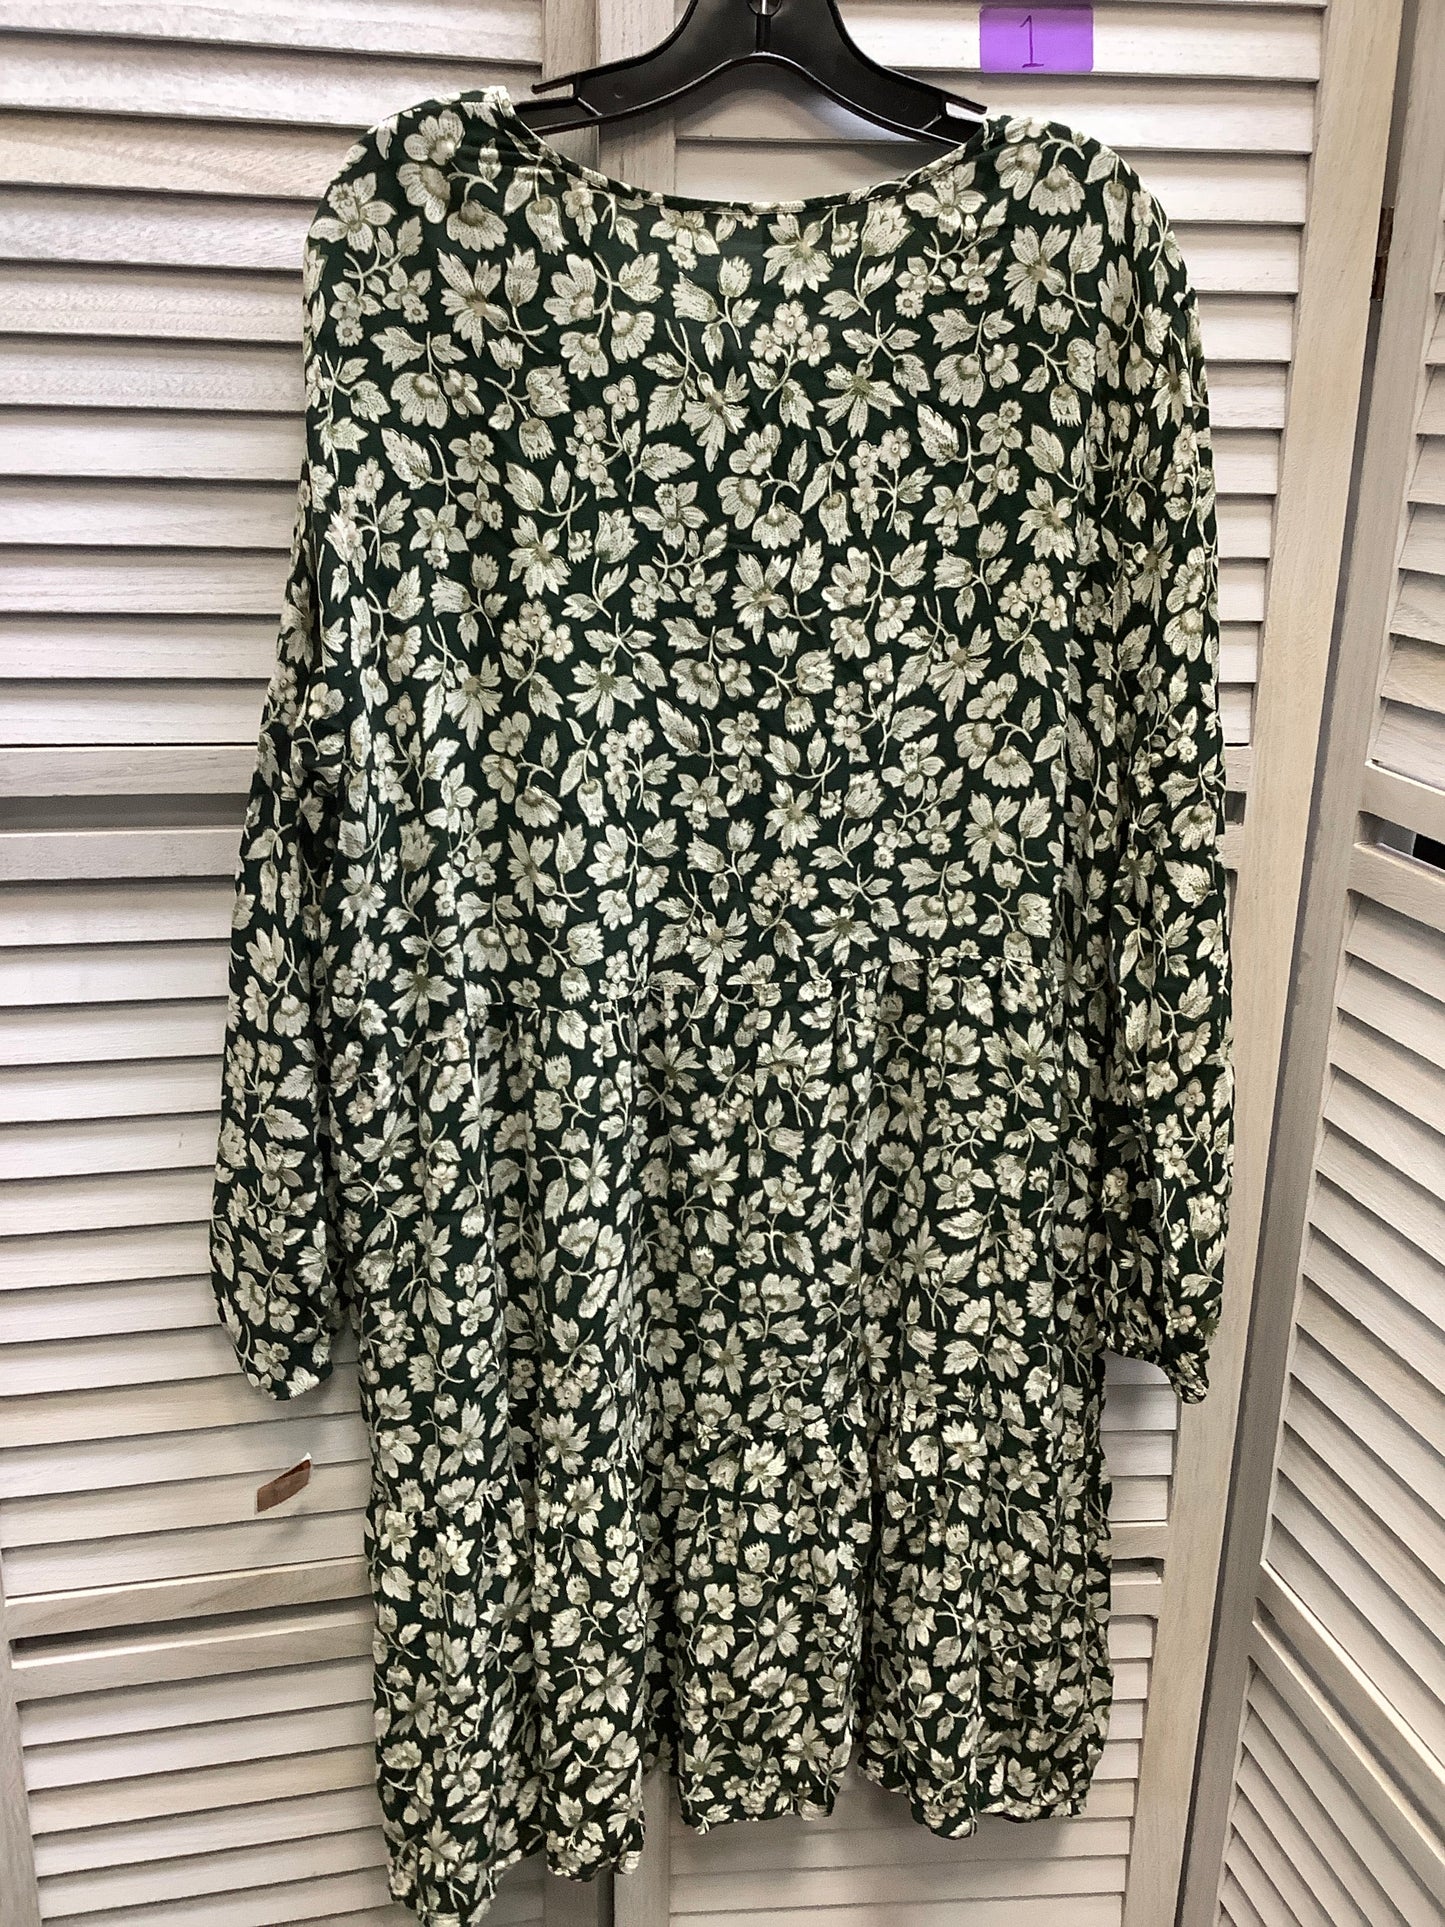 Floral Print Dress Casual Short Old Navy, Size 2x